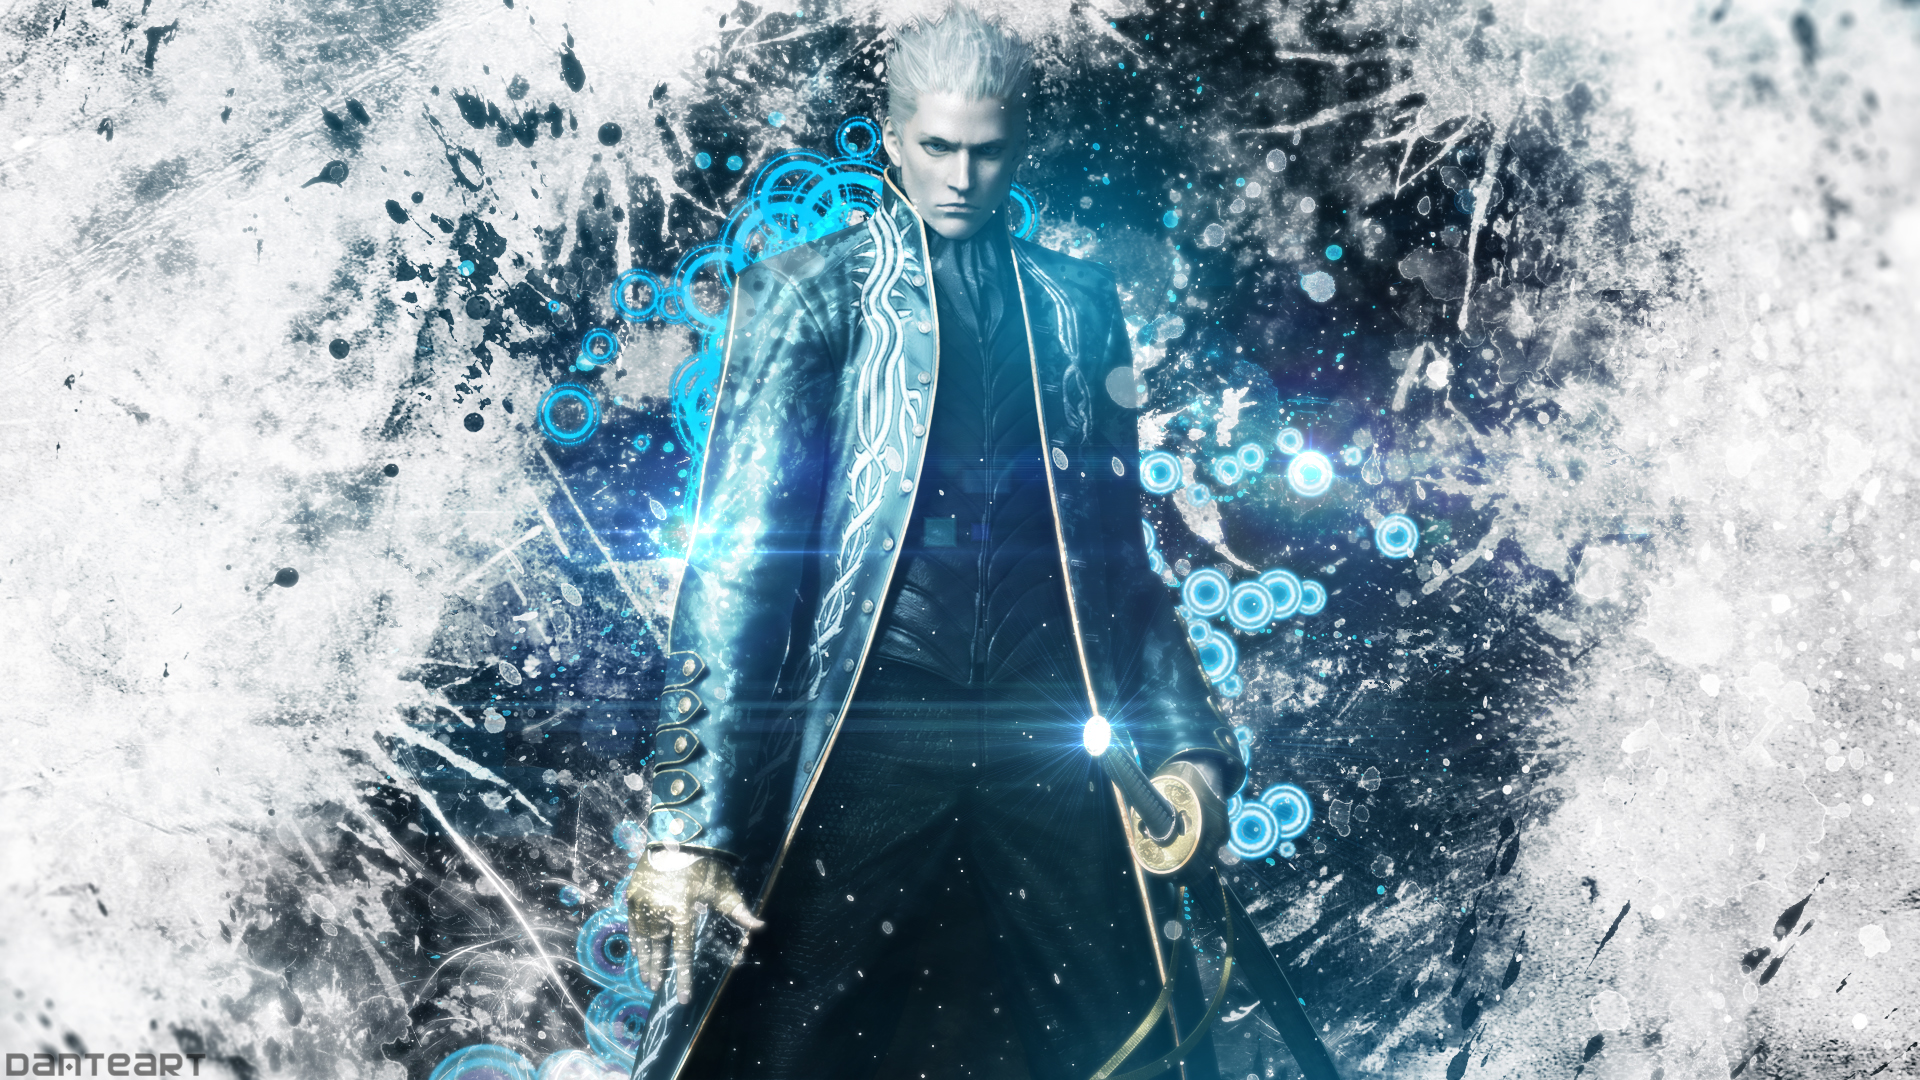 Devil May Cry Dante Anime Wallpapers - Wallpaper Cave